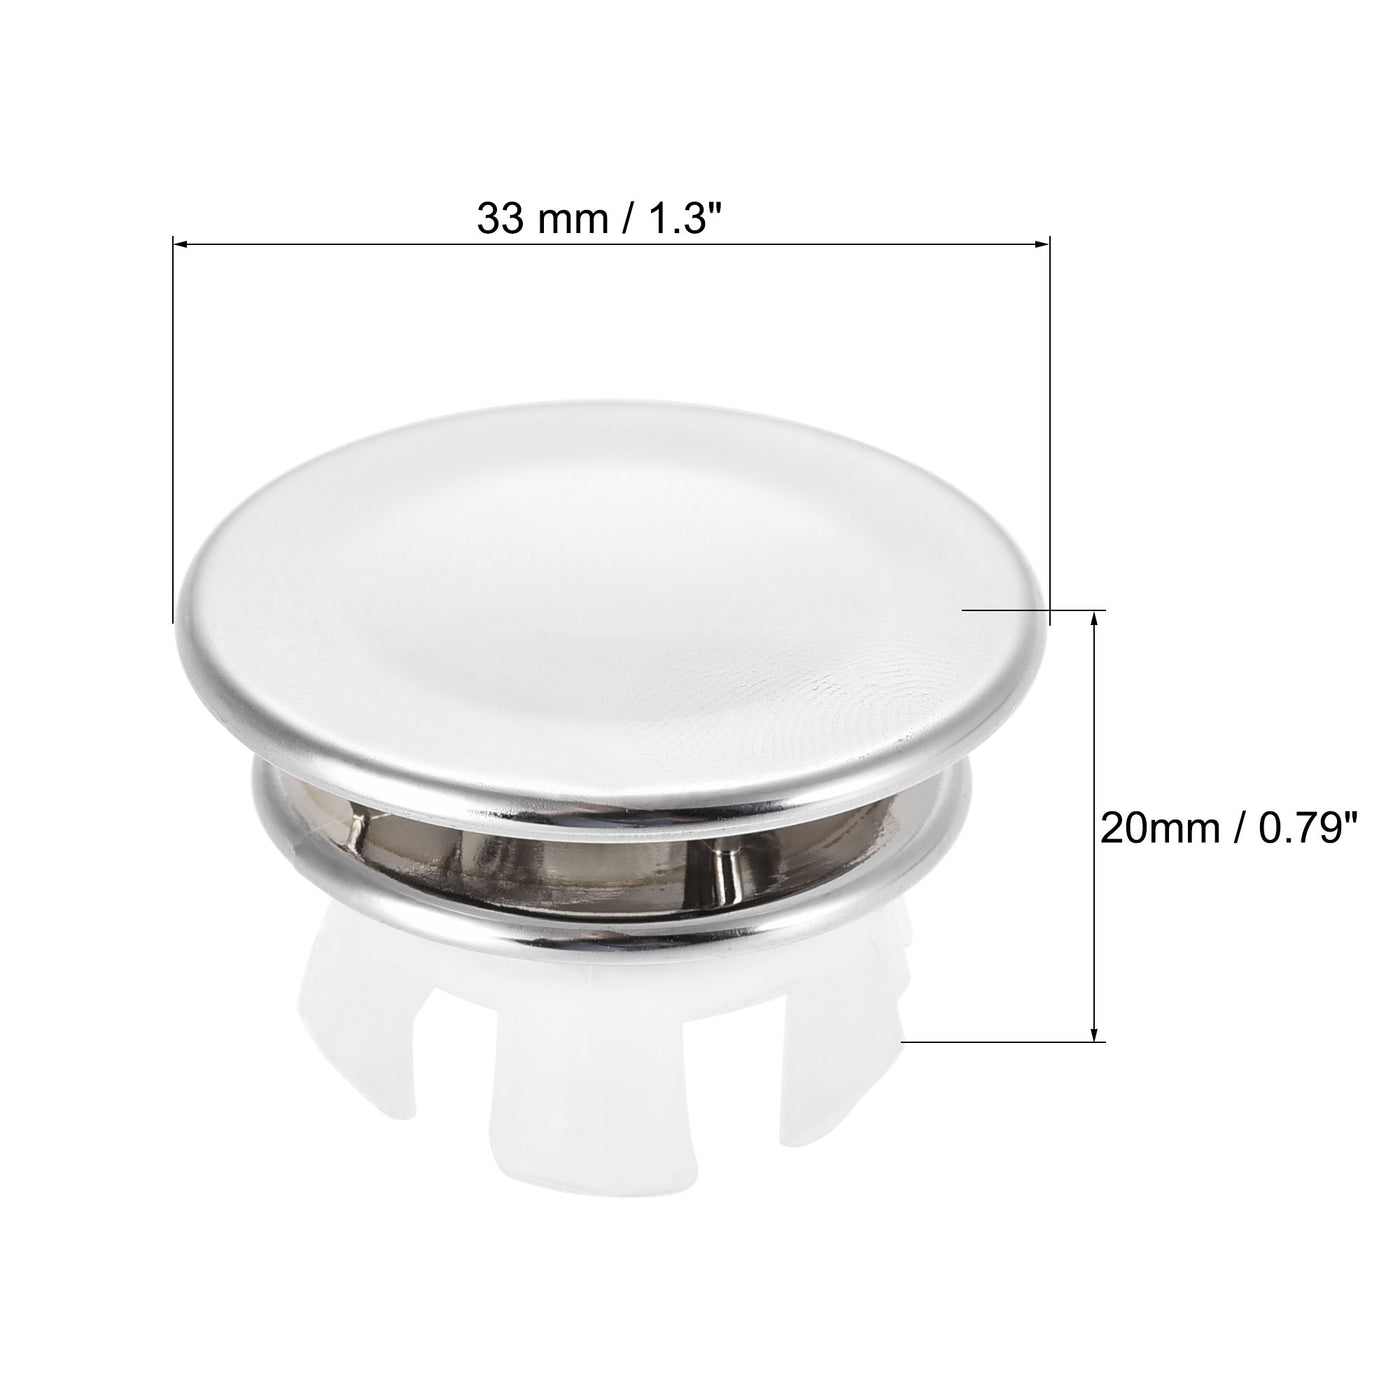 uxcell Uxcell Sink Basin Trim Overflow Cover Insert in Hole Round Caps Silver Tone 33 x 20mm 12pcs